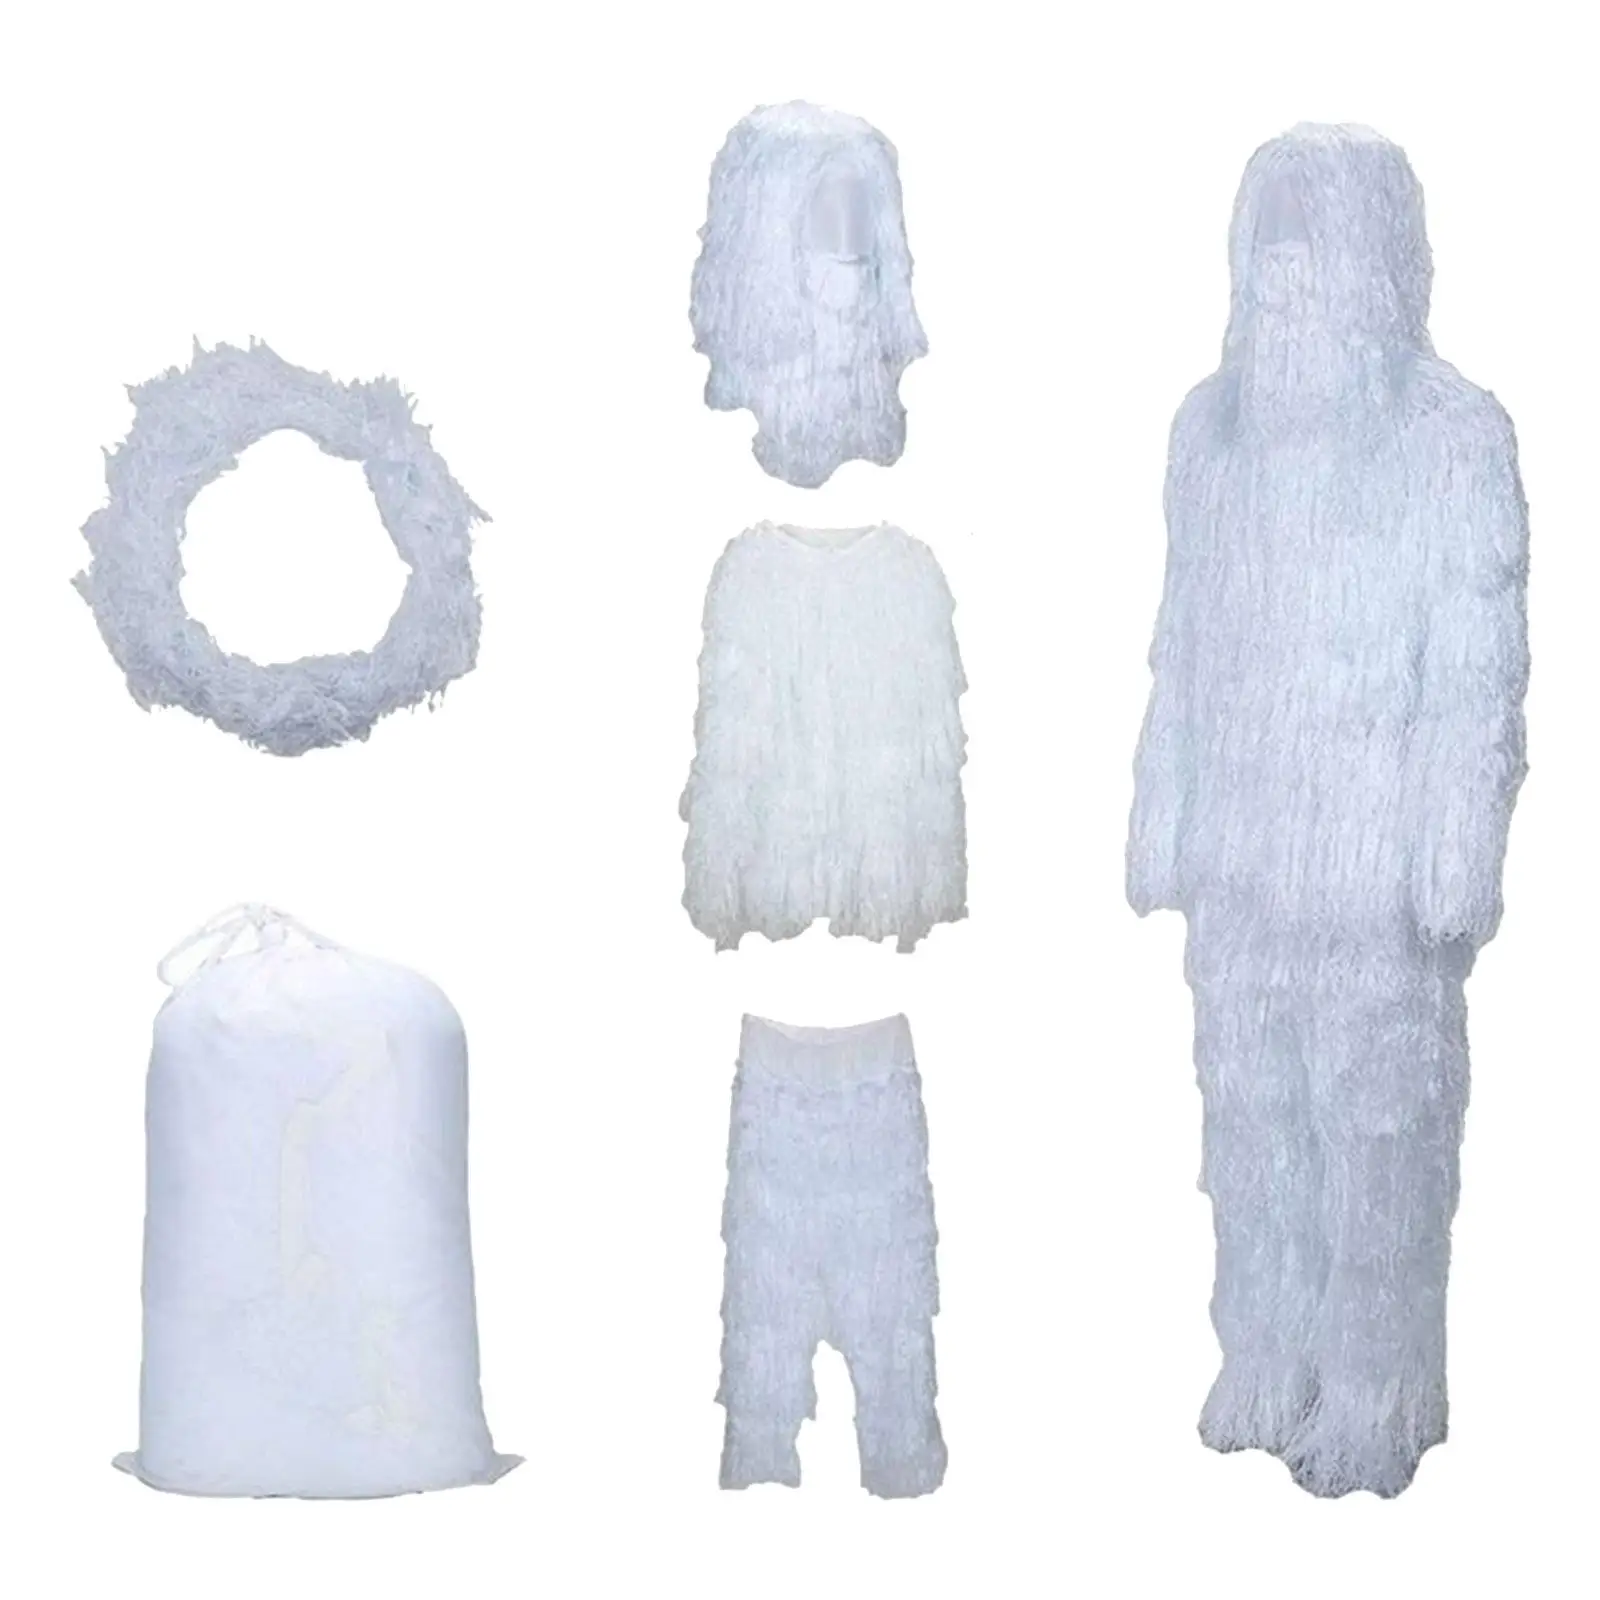 Ghillie Suit Outfits for Boys Girls Woodland Snow Ghillie Clothes Uniform Set for Game Hunting Photography Halloween Outdoor